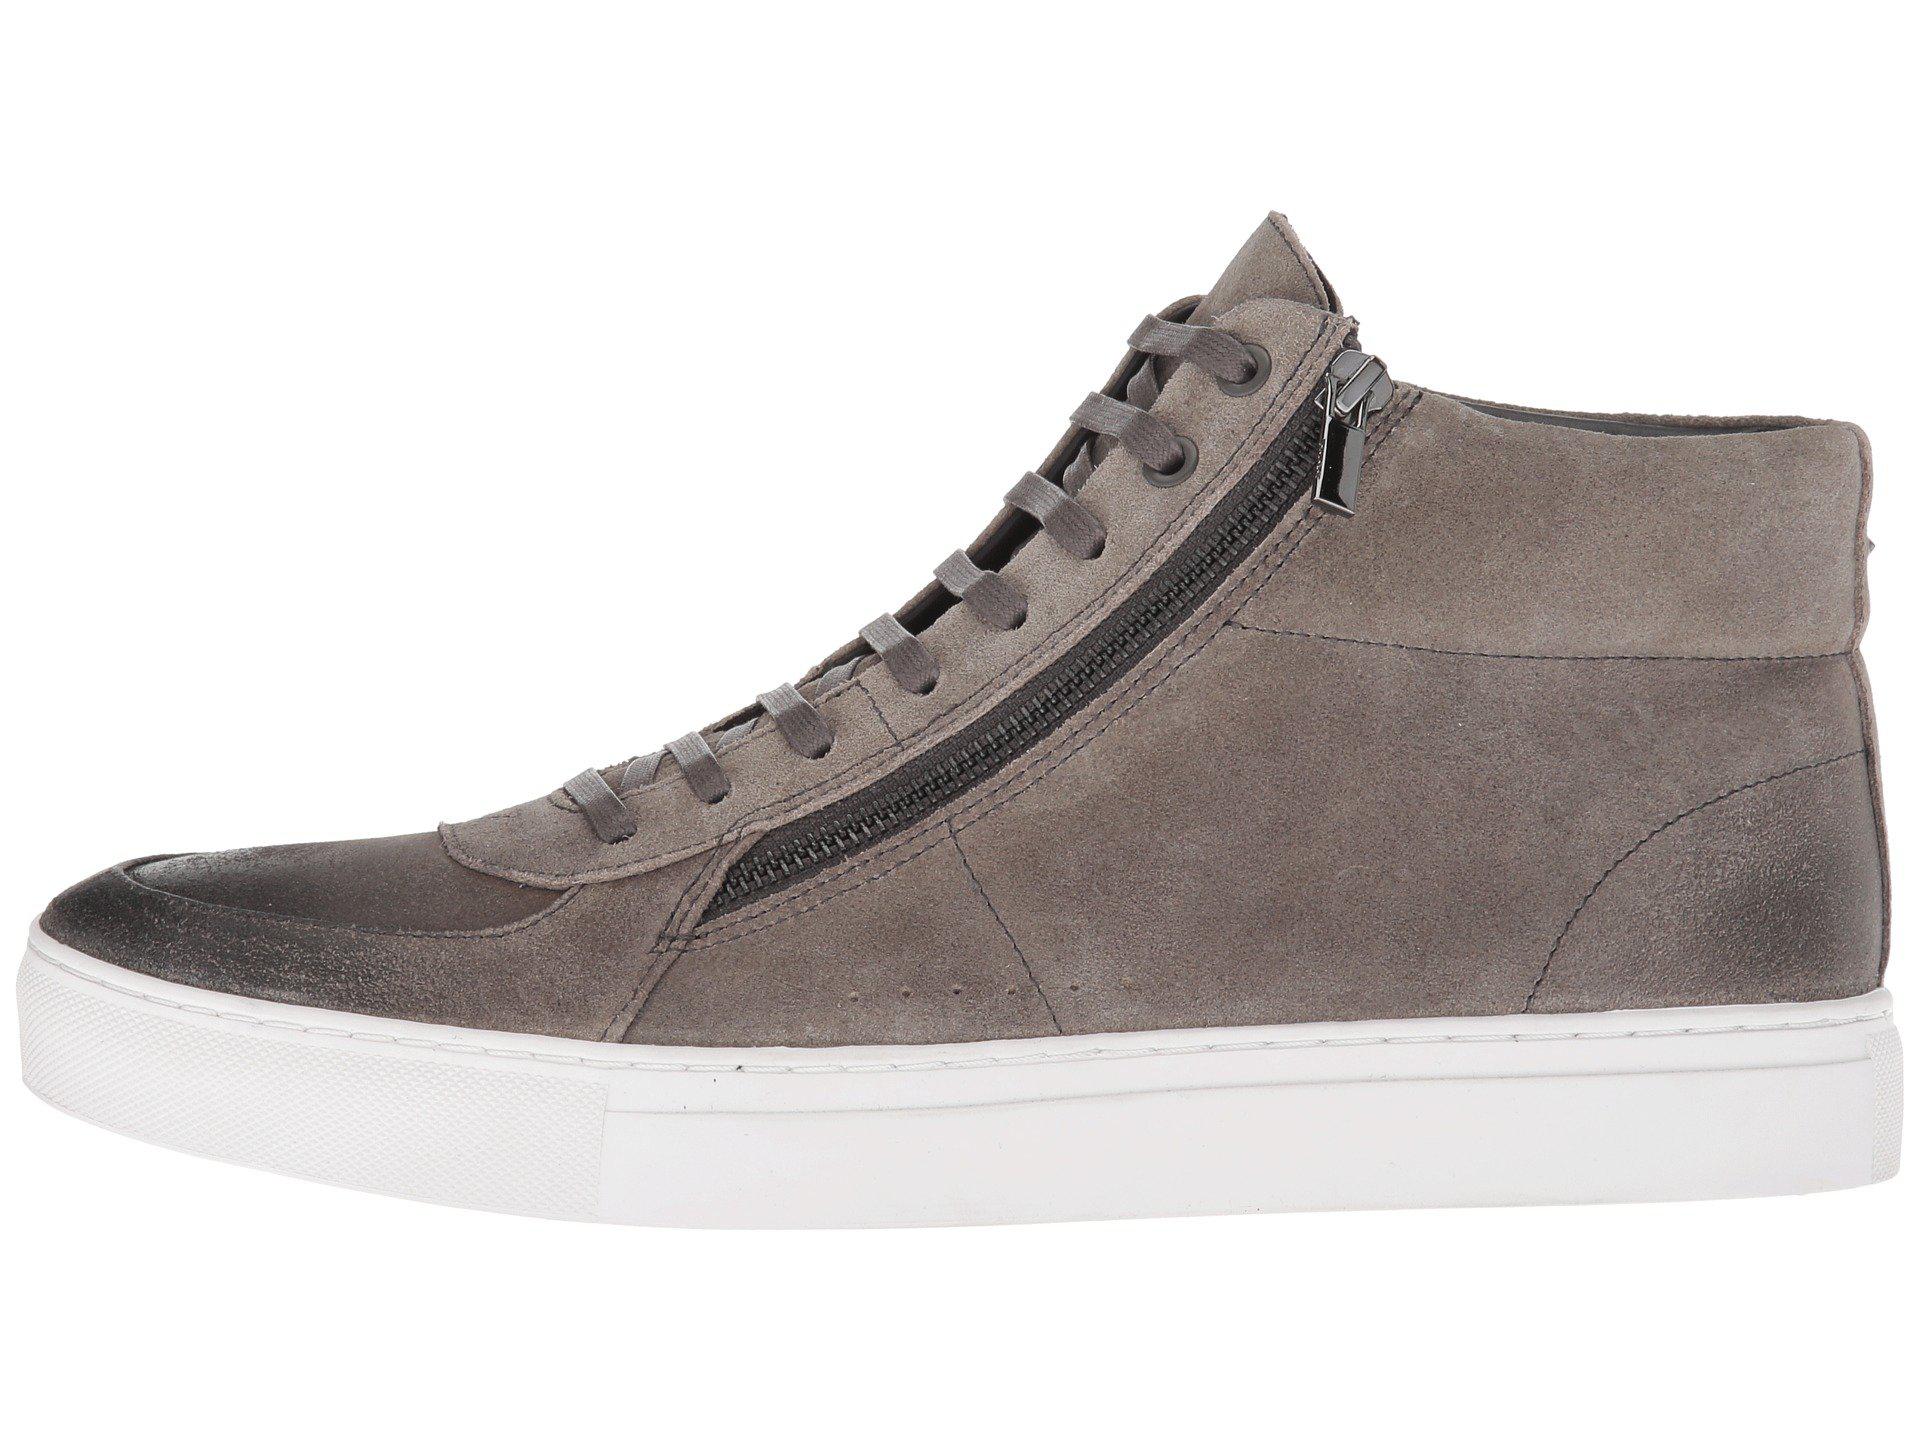 BOSS Futurism High Top Sneaker By Hugo in Gray for Men - Lyst